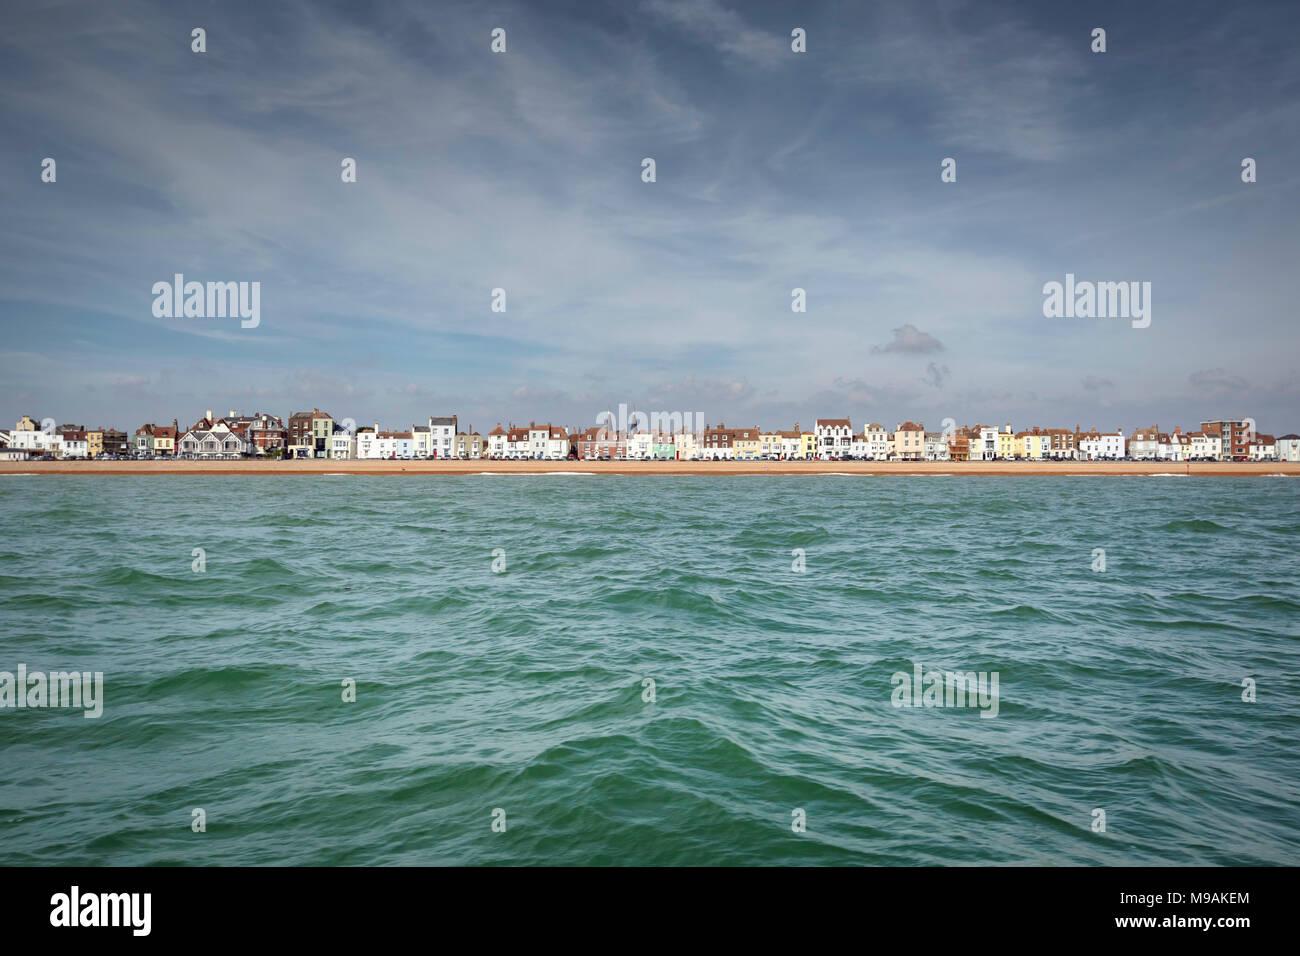 A picturesque scene of the colourful houses along Deal sea front taken from a boat on the English Channel, Kent, UK. Stock Photo